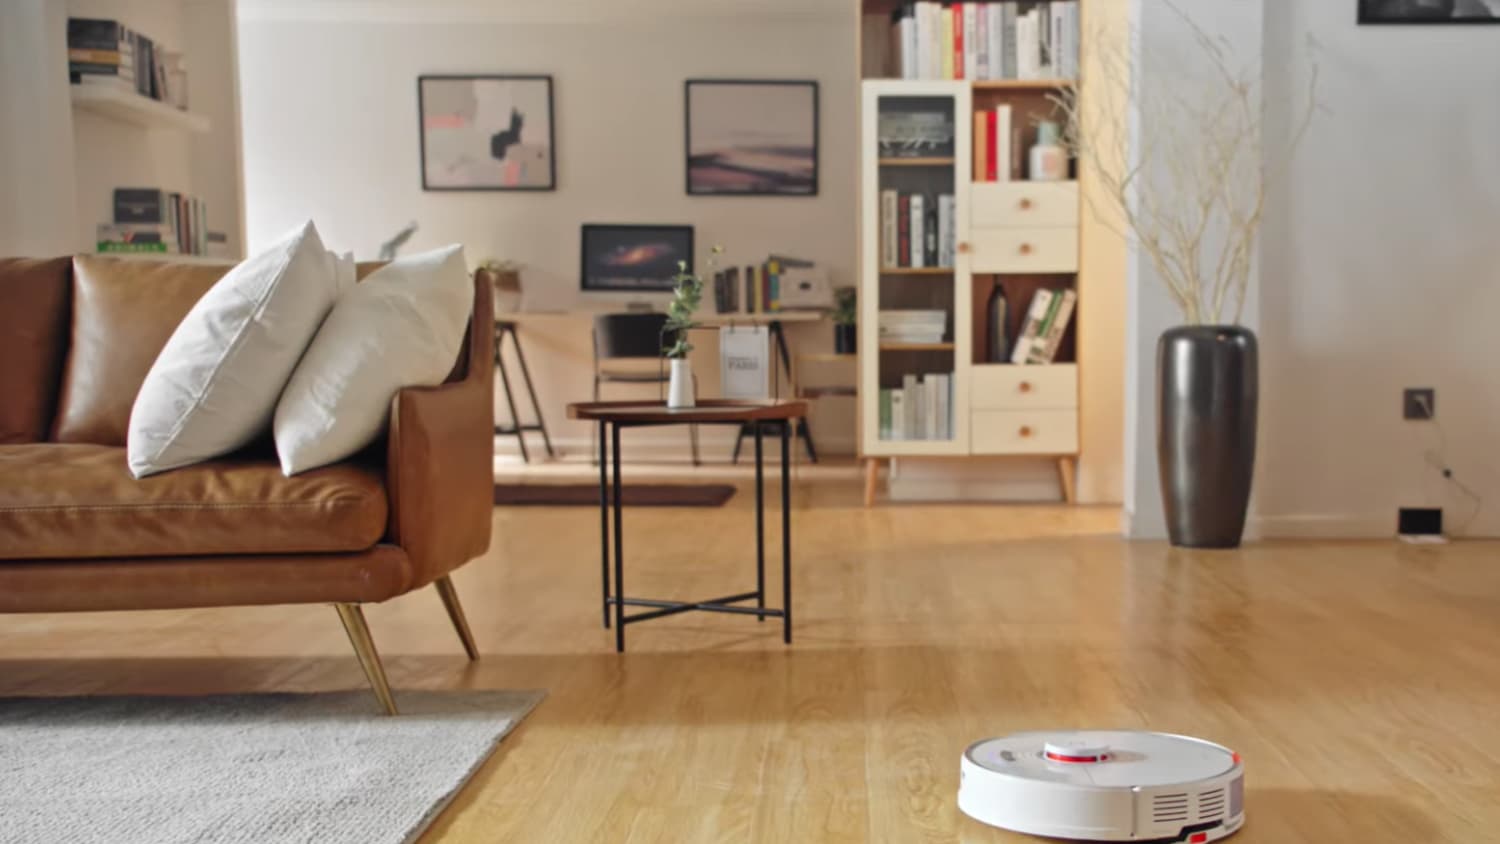 Xiaomi Robot Vacuum-Mop 2i Review - Ultimate Smart Cleaning Companion 